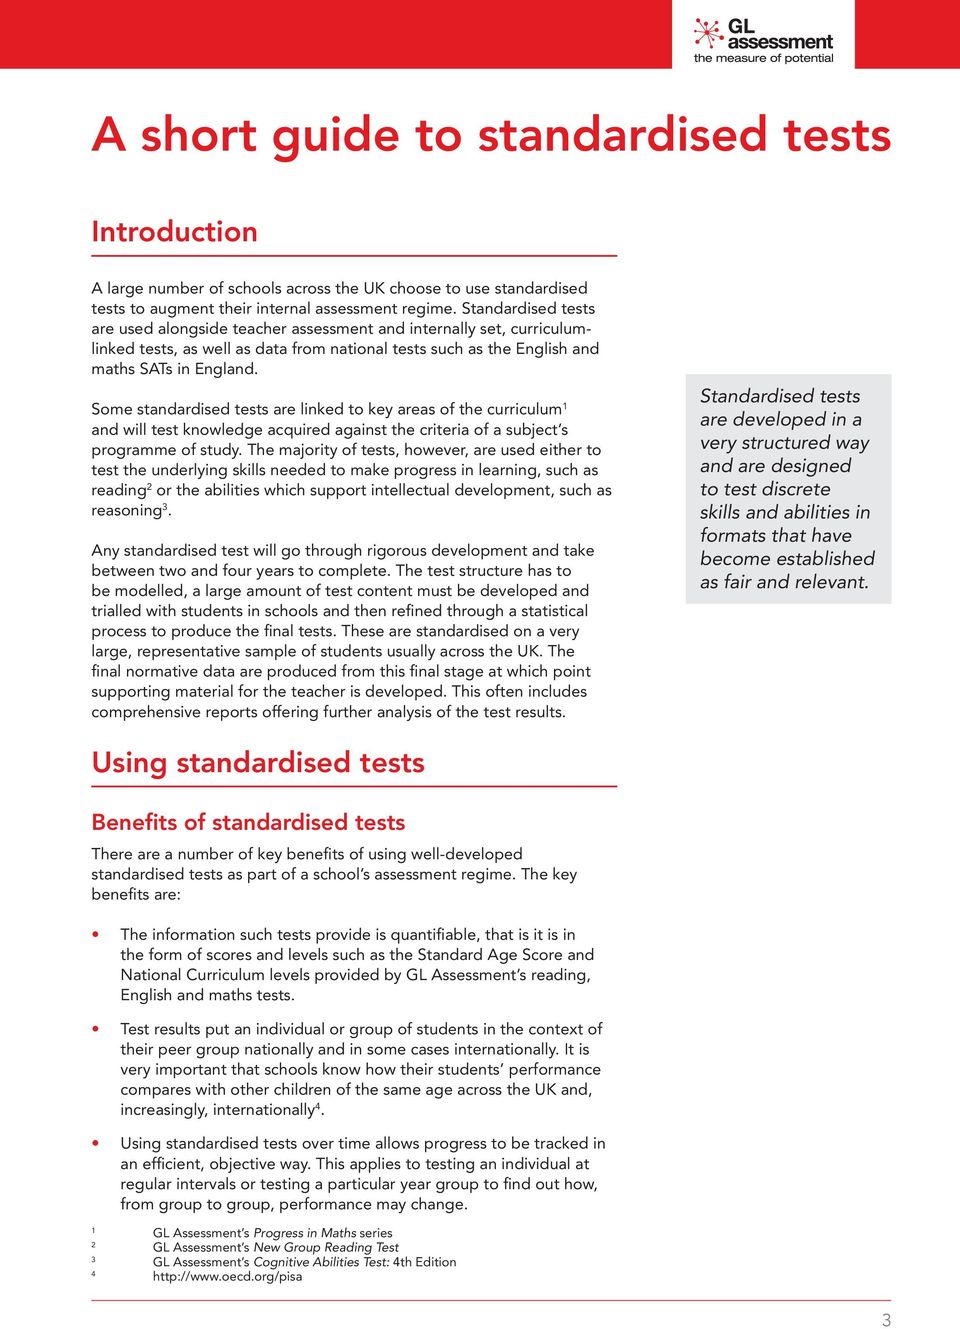 Some standardised tests are linked to key areas of the curriculum 1 and will test knowledge acquired against the criteria of a subject s programme of study.